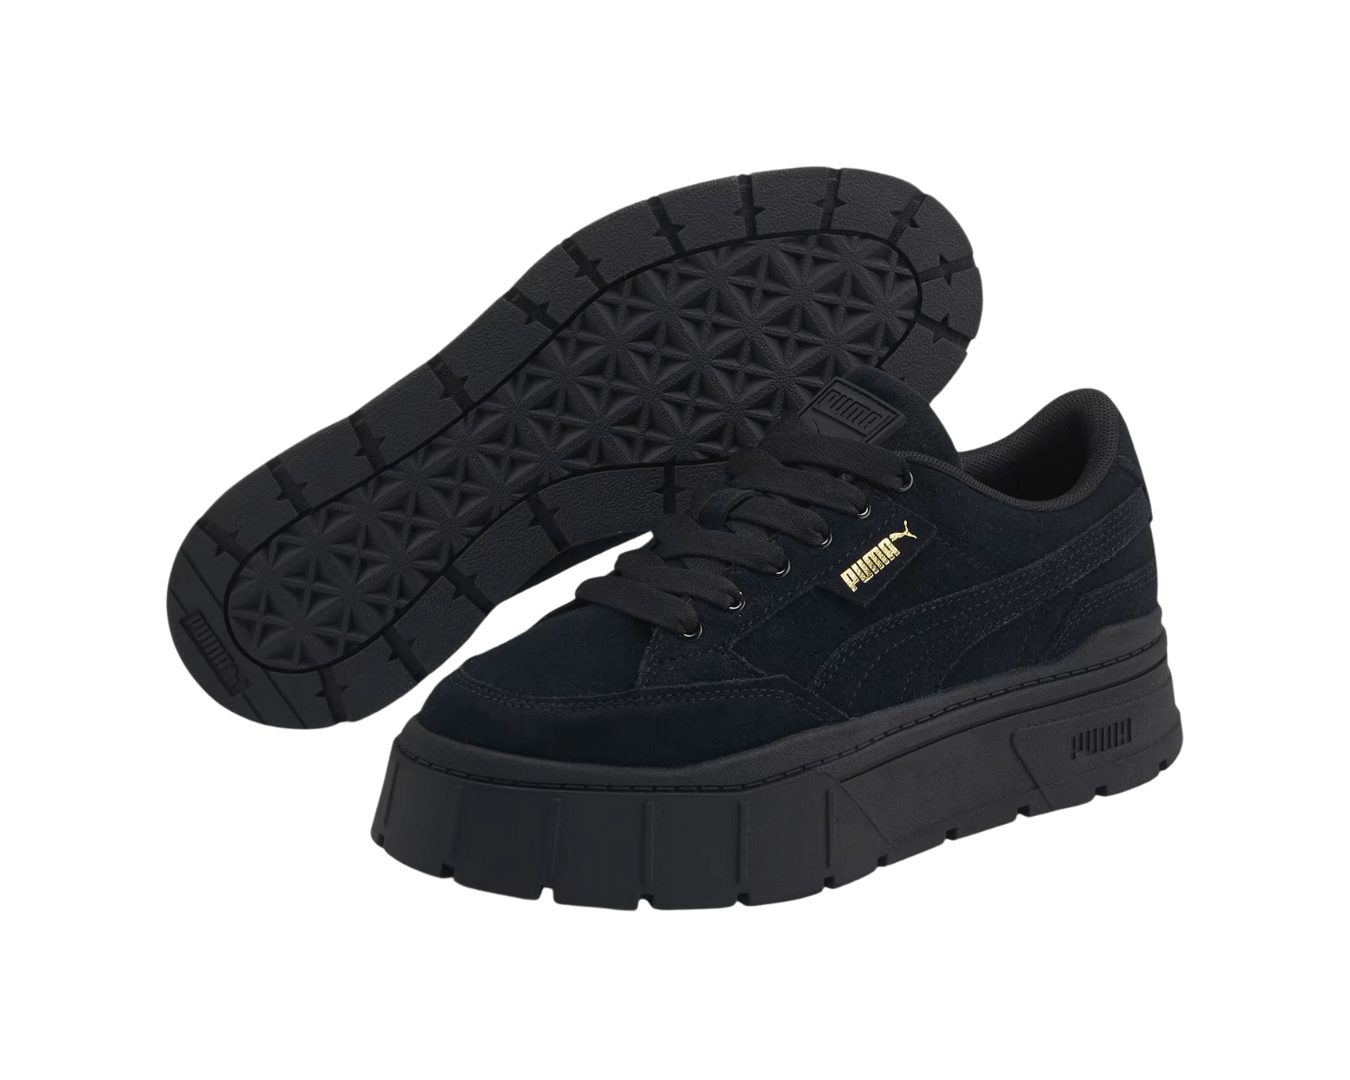 Puma Suede Platform Arctica Women's Trainer / Puma Sneakers / Puma black  shoes / Casual sneakers / Black sneakers / Black sport shoes, Women's  Fashion, Footwear, Sneakers on Carousell